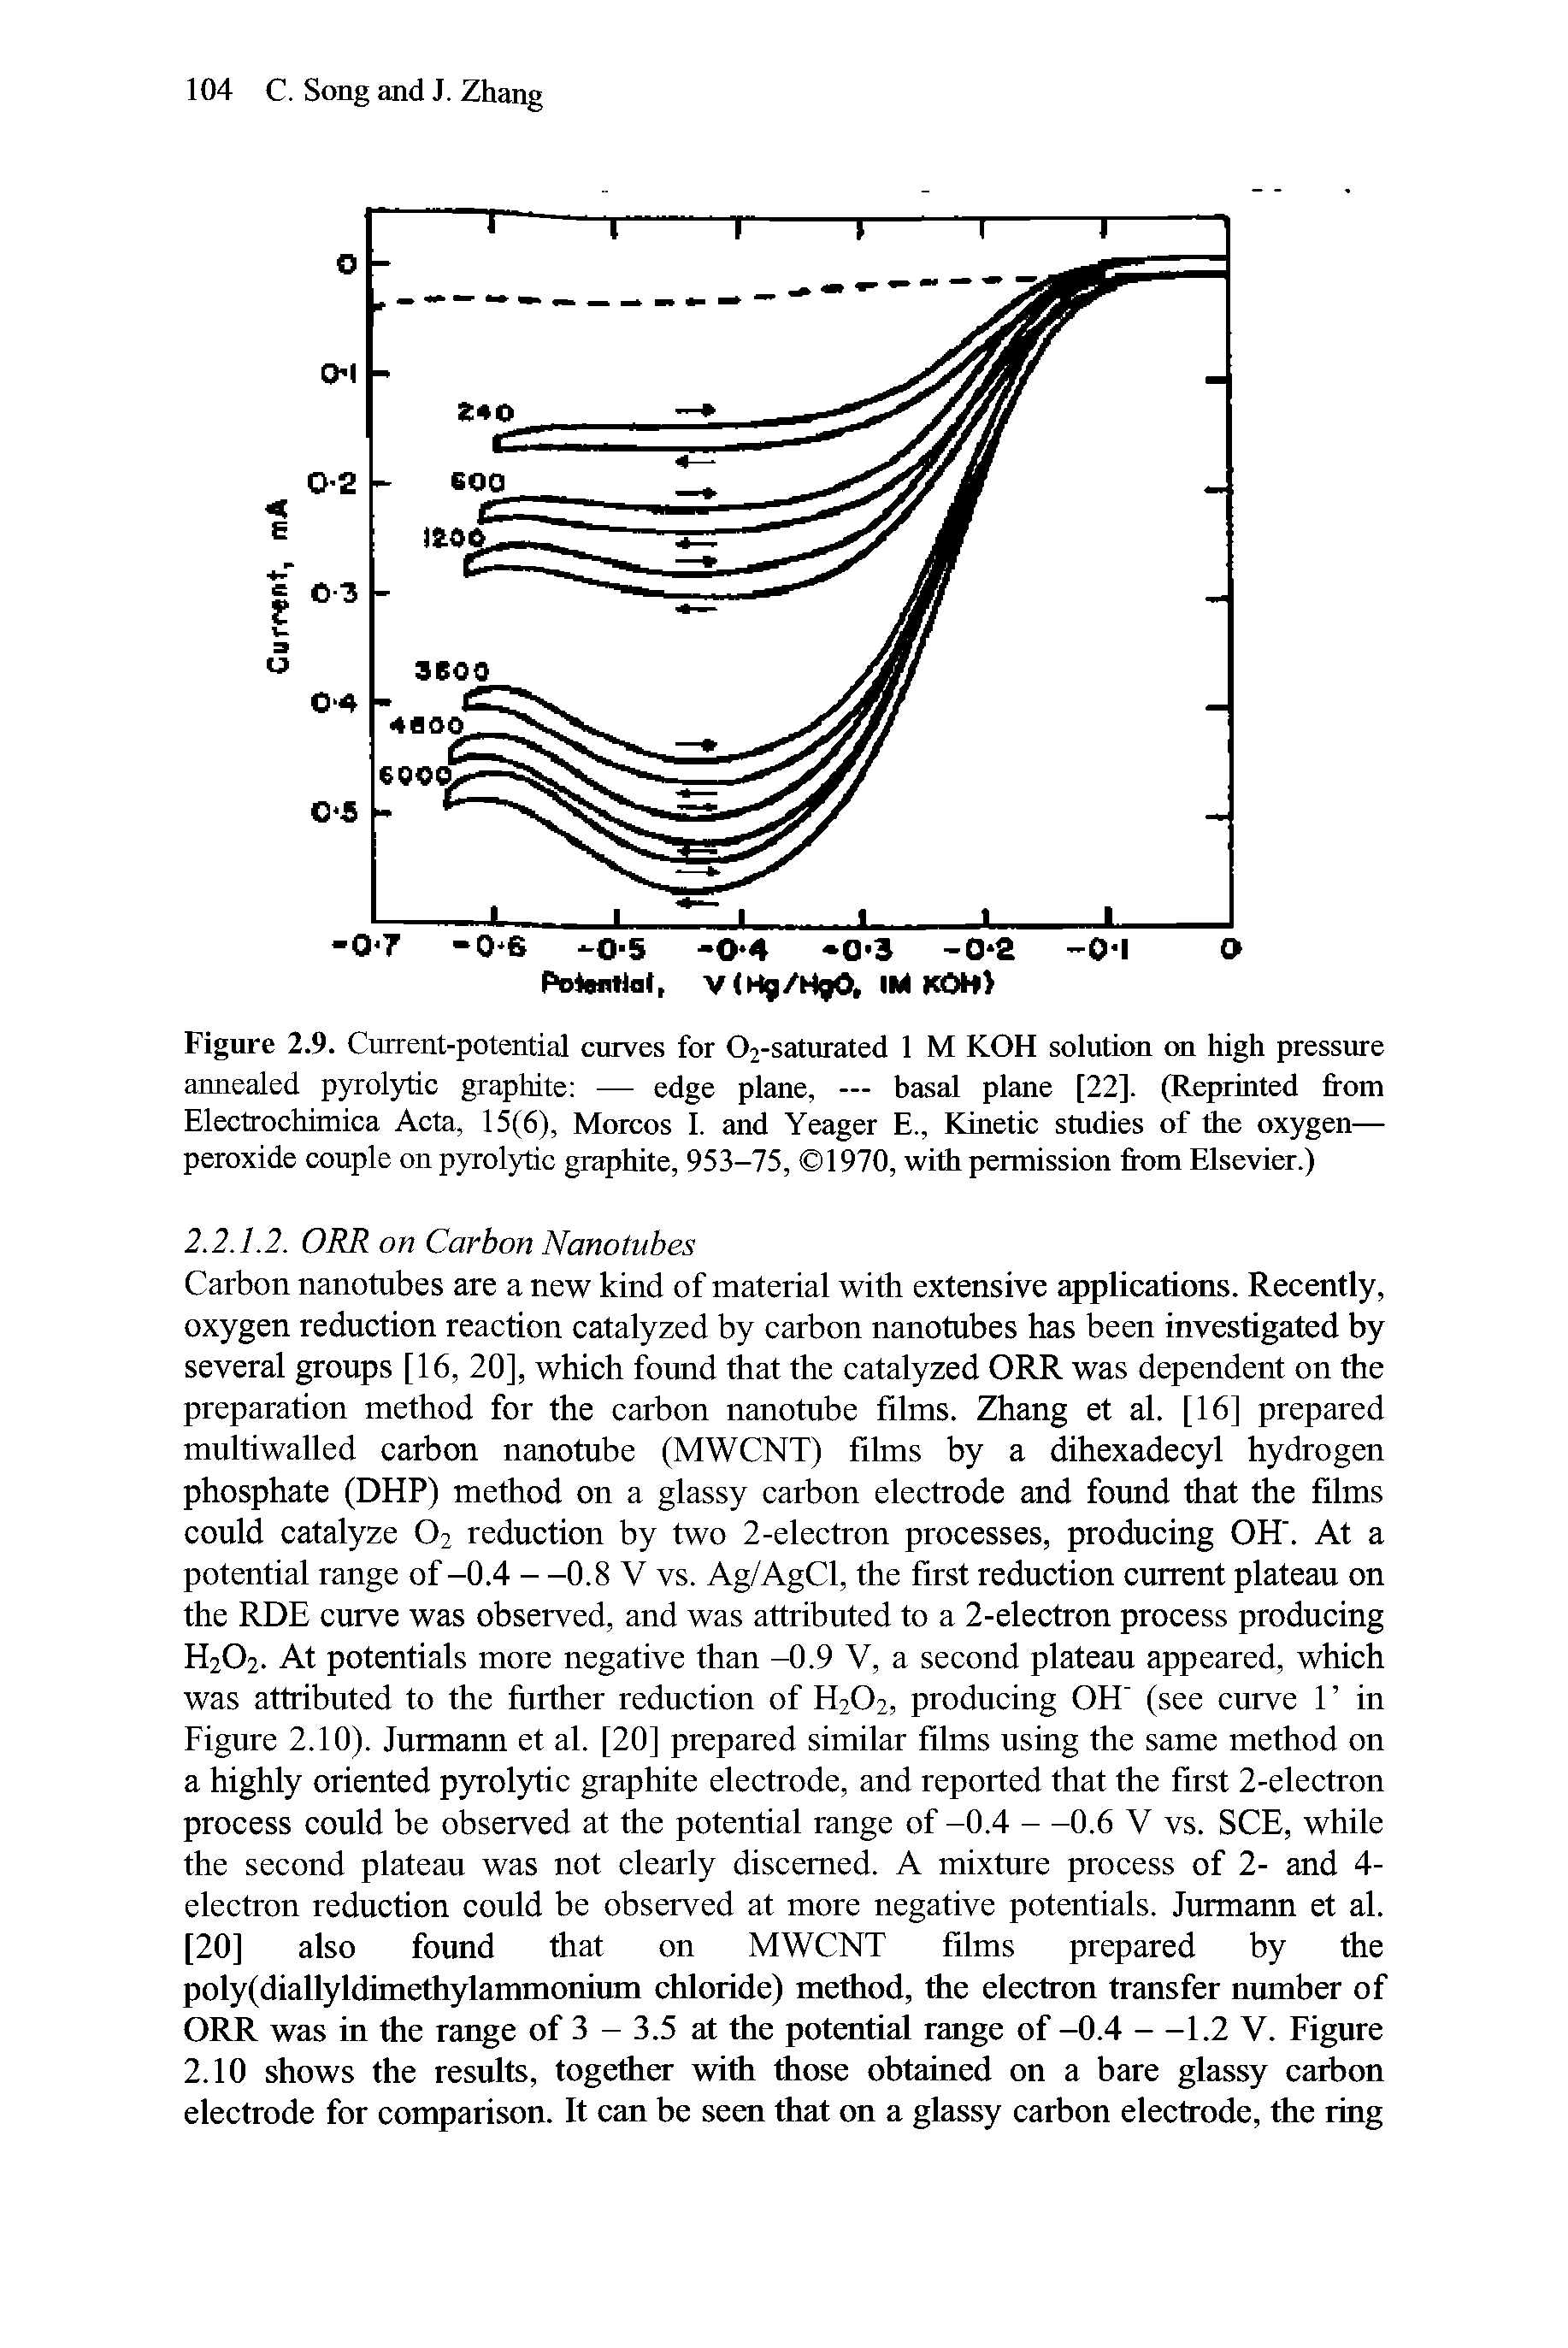 Figure 2.9. Current-potential curves for 02-saturated 1 M KOH solution on high pressure annealed pyrolytic graphite — edge plane, — basal plane [22]. (Reprinted from Electrochimica Acta, 15(6), Morcos 1. and Yeager E., Kinetic studies of the oxygen— peroxide couple on pyrolytic graphite, 953-75, 1970, with permission from Elsevier.)...